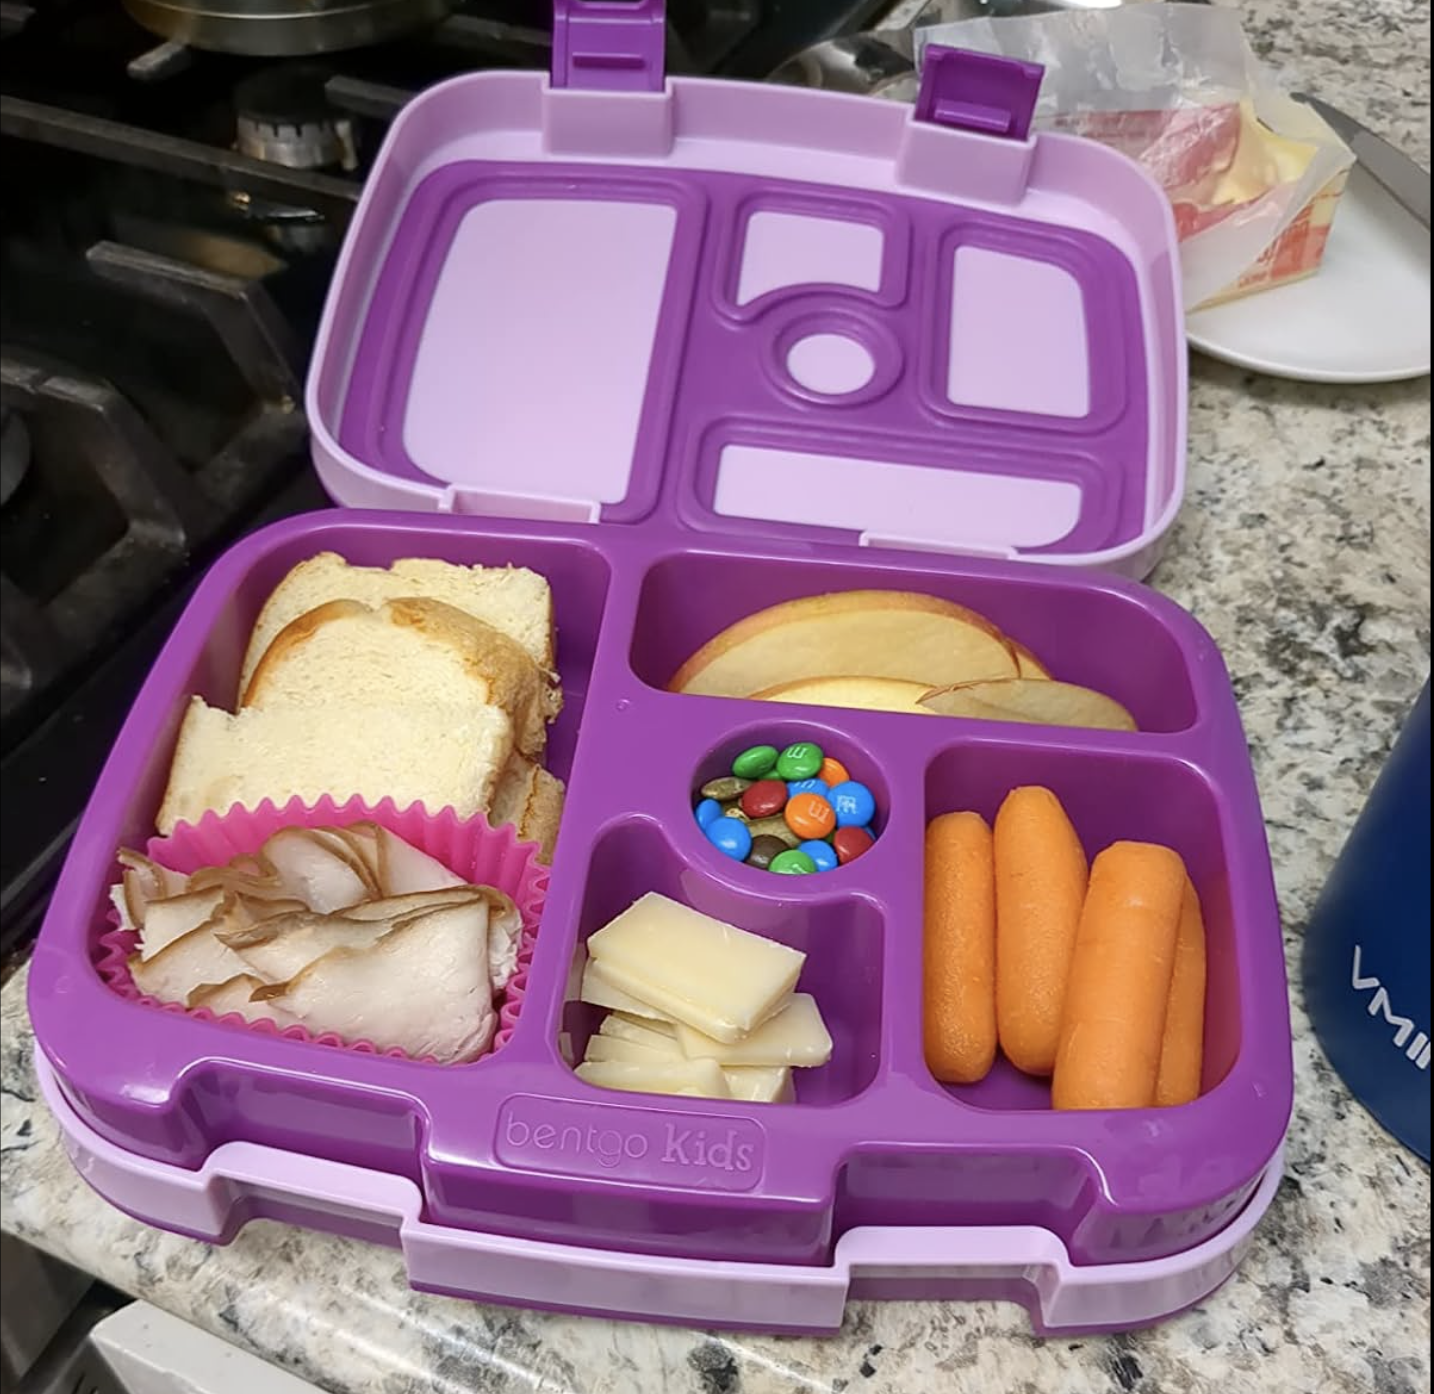 purple lunchbox with five differently shaped sections for fruits, veggies, cheese, and. a sandwich